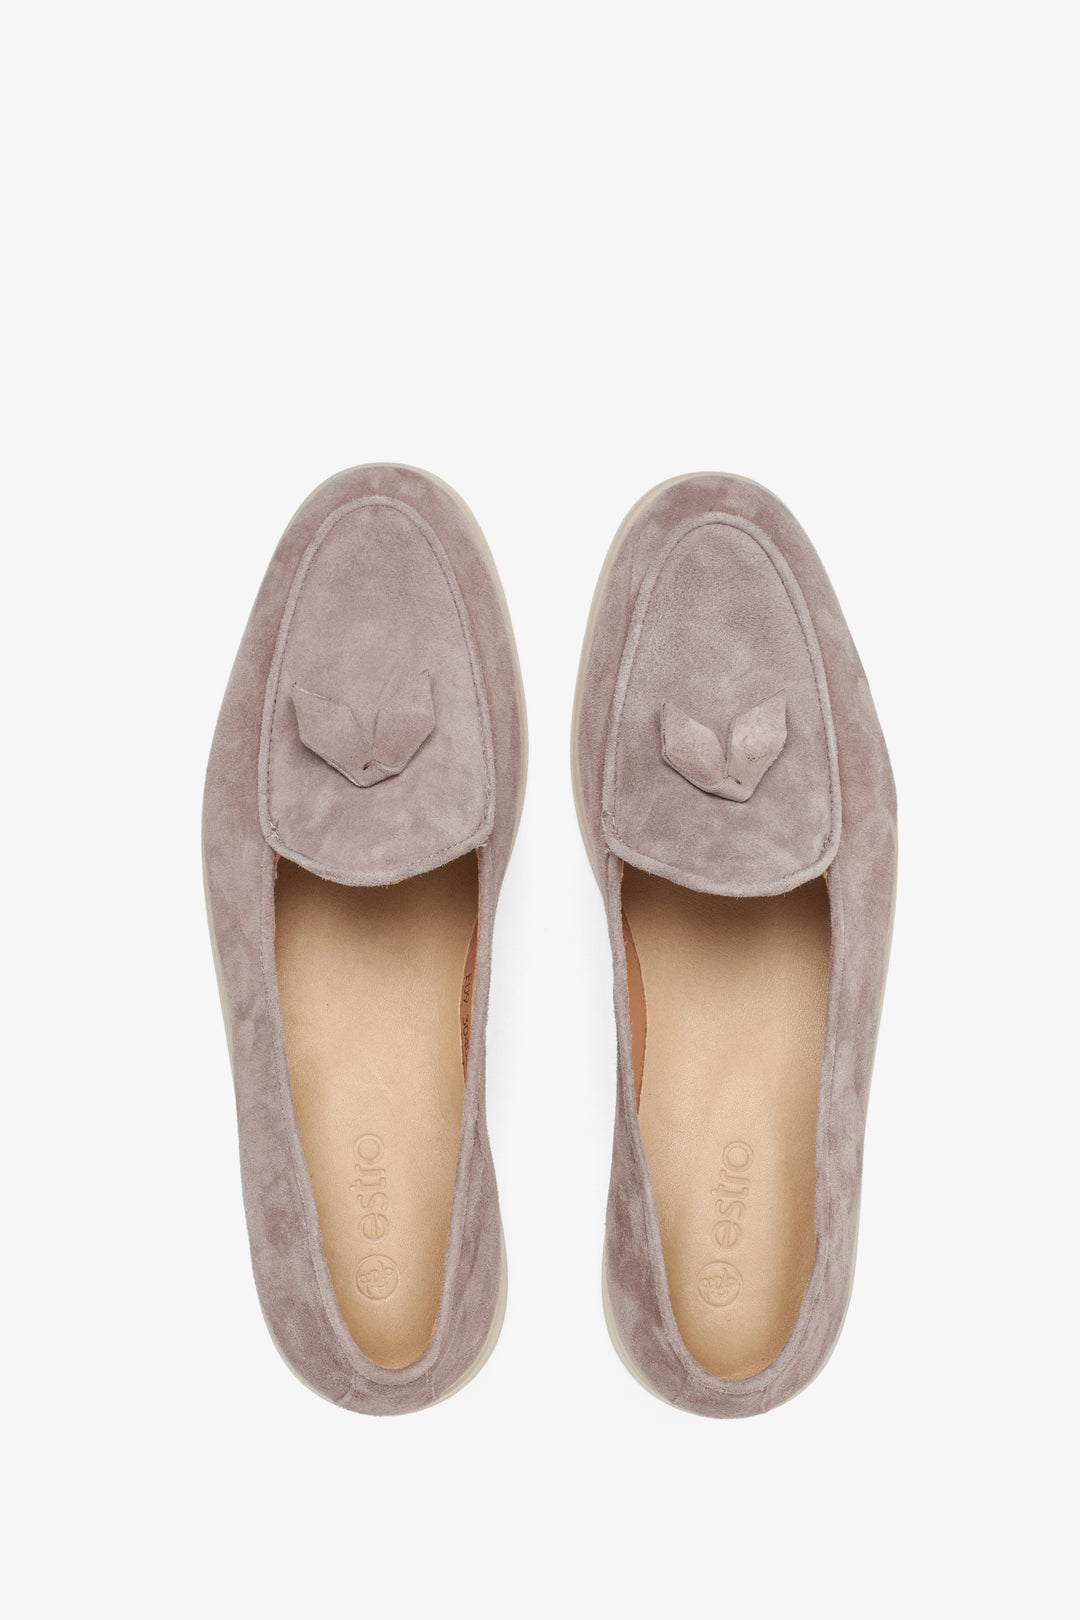 Women's beige  velour loafers by Estro - top view presentation of the model.